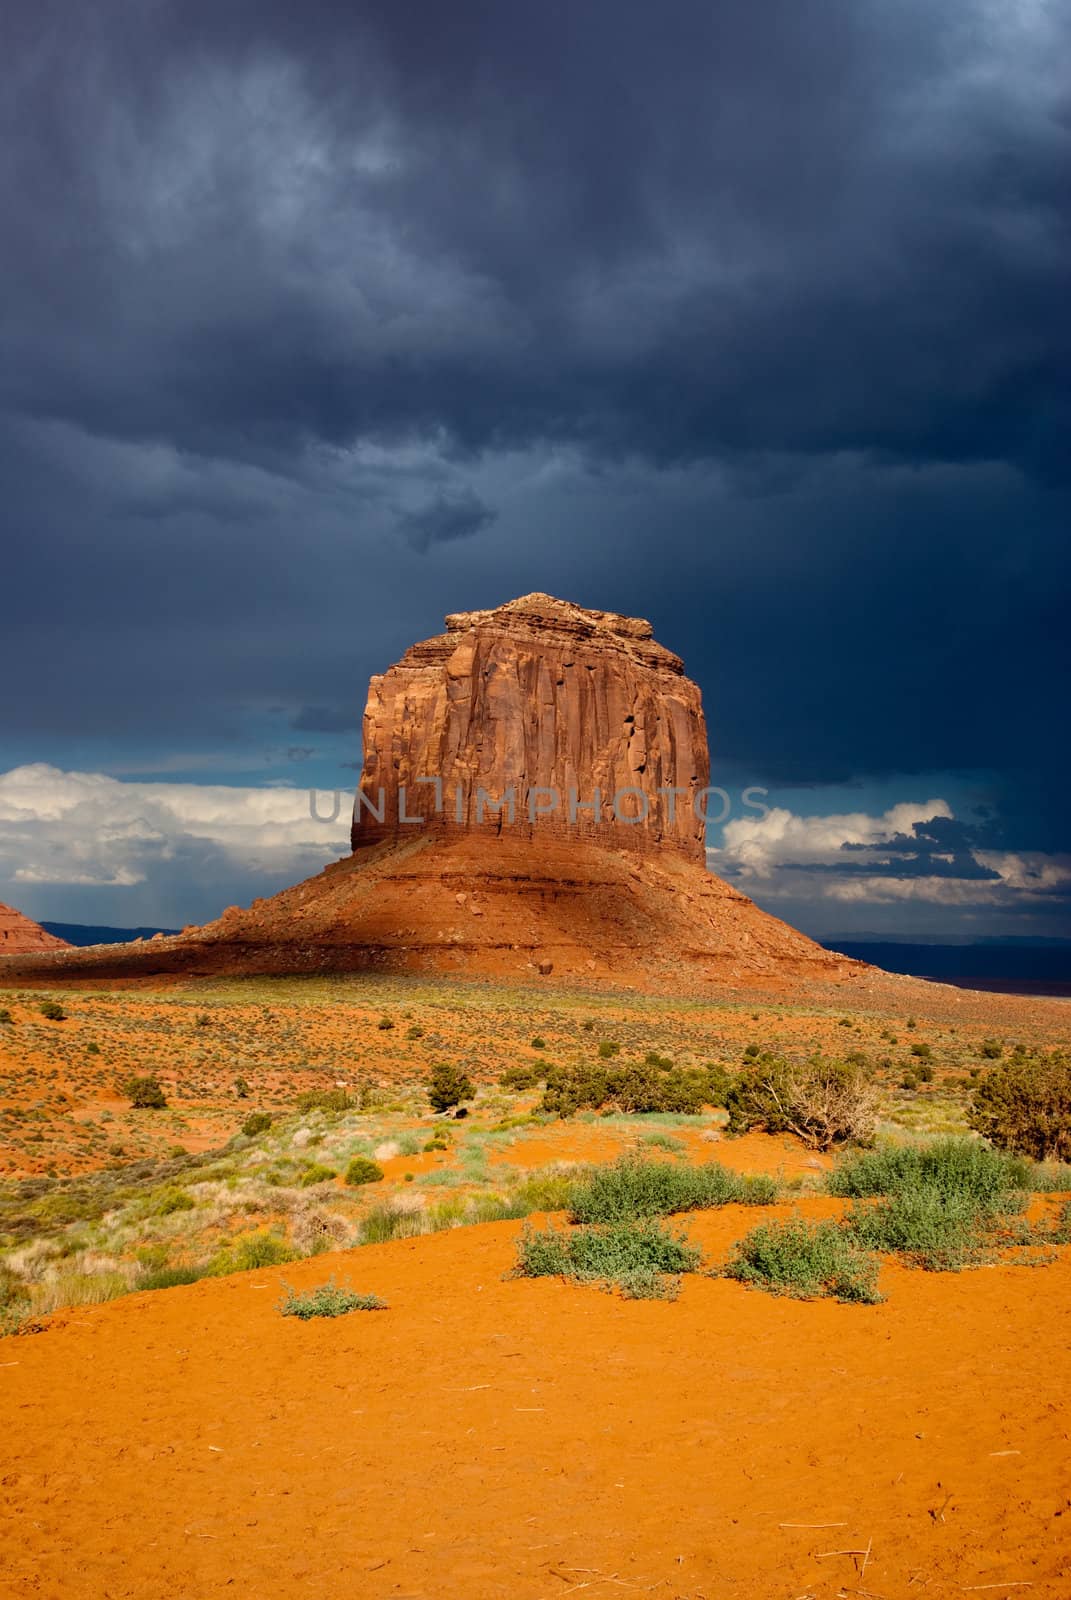 Storm clouds over Monument Valley National Park